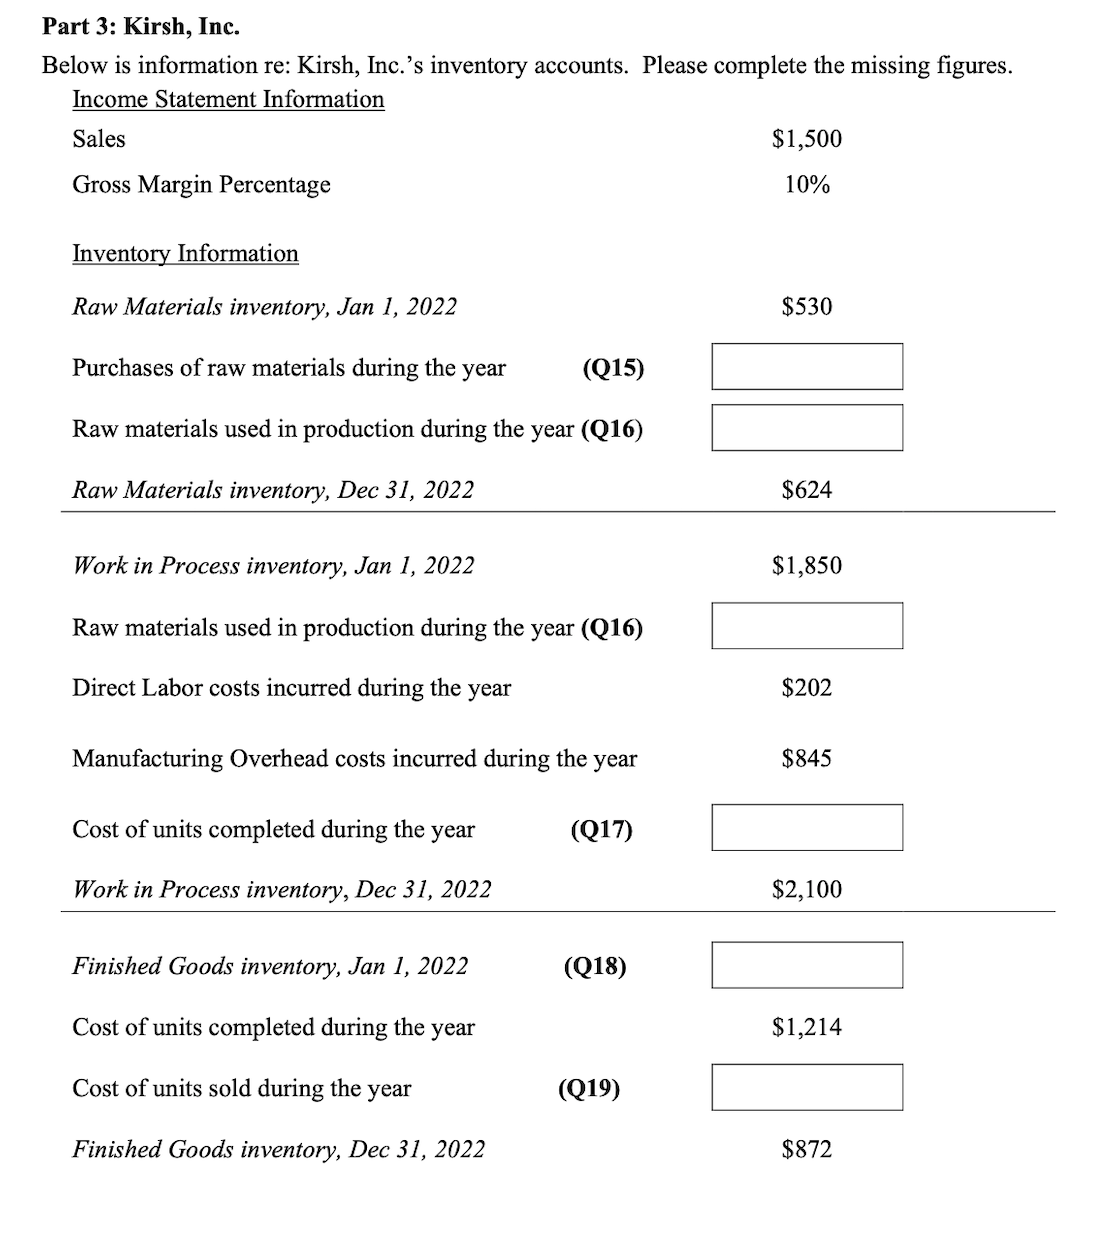 Part 3: Kirsh, Inc.
Below is information re: Kirsh, Inc.'s inventory accounts. Please complete the missing figures.
Income Statement Information
Sales
$1,500
Gross Margin Percentage
10%
Inventory Information
Raw Materials inventory, Jan 1, 2022
$530
Purchases of raw materials during the year
(Q15)
Raw materials used in production during the year (Q16)
Raw Materials inventory, Dec 31, 2022
$624
Work in Process inventory, Jan 1, 2022
$1,850
Raw materials used in production during the year (Q16)
Direct Labor costs incurred during the year
$202
Manufacturing Overhead costs incurred during the
year
$845
Cost of units completed during the
year
(Q17)
Work in Process inventory, Dec 31, 2022
$2,100
Finished Goods inventory, Jan 1, 2022
(Q18)
Cost of units completed during the year
$1,214
Cost of units sold during the year
(Q19)
Finished Goods inventory, Dec 31, 2022
$872
